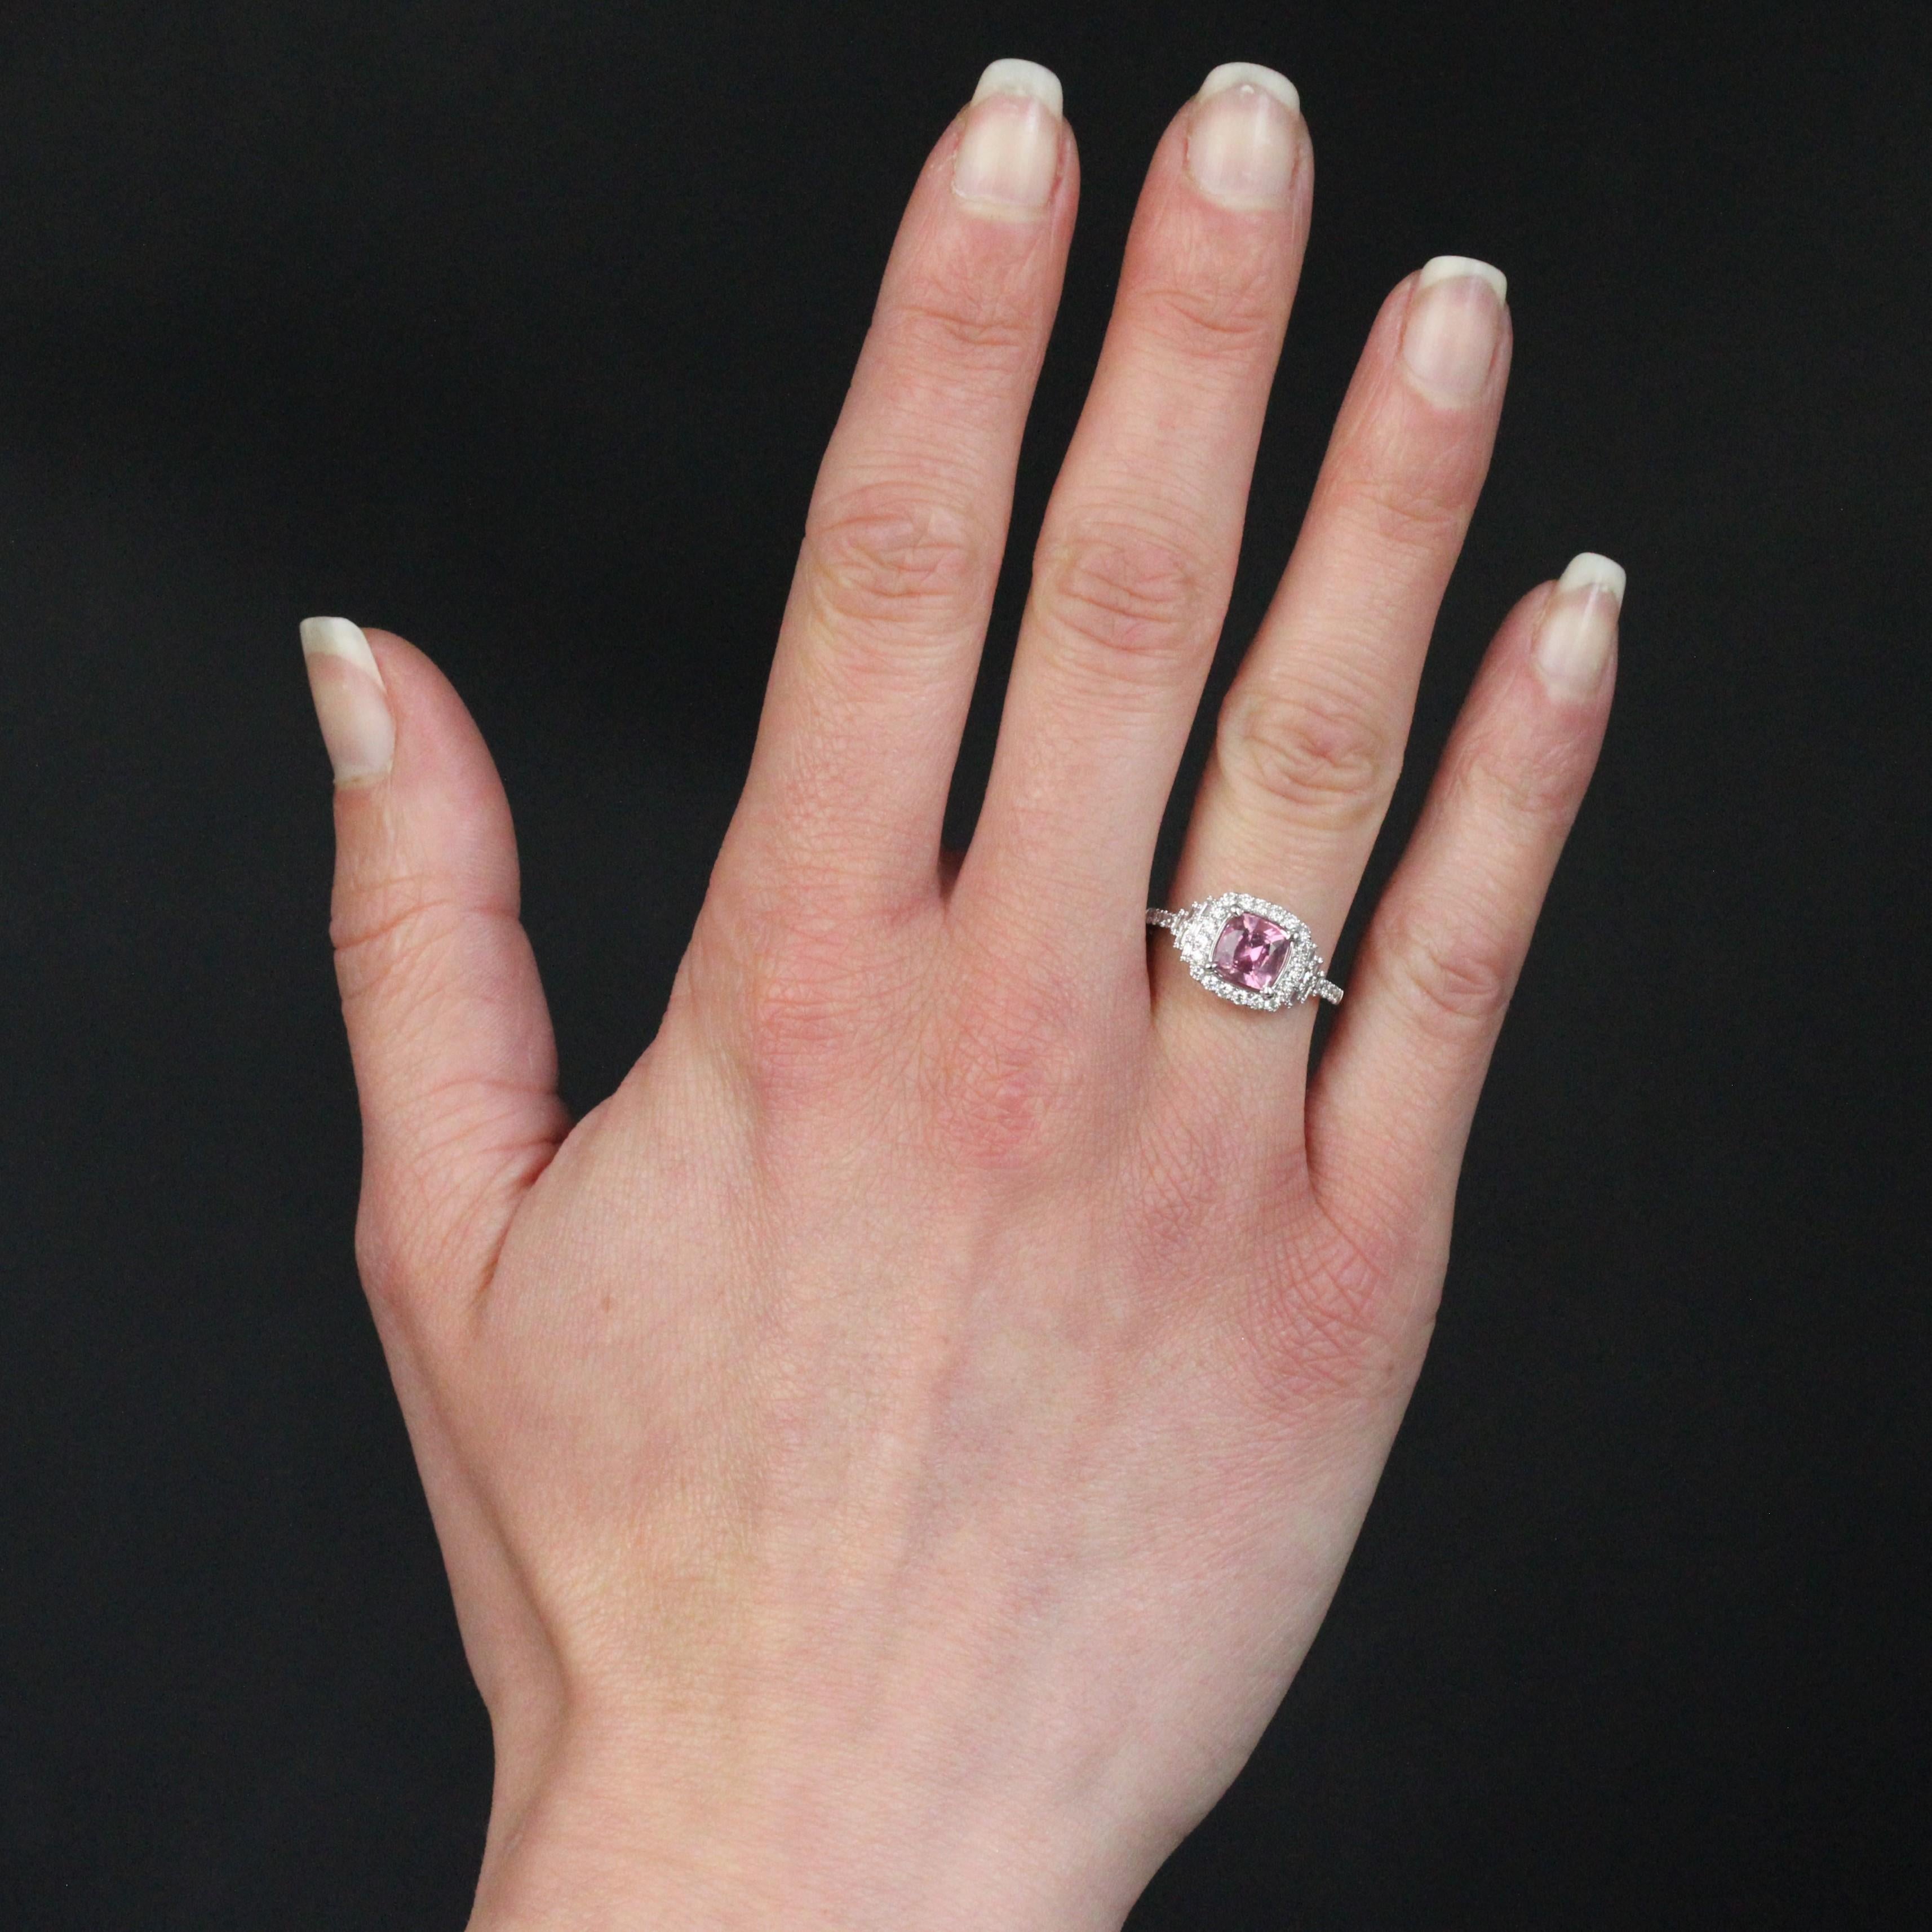 Ring in 18 karat white gold, eagle head hallmark.
The setting of this white gold ring forms a cushion entirely set with modern brilliant-cut diamonds and adorned in the center with a pink sapphire of the same shape, held in place with 4 claws. The